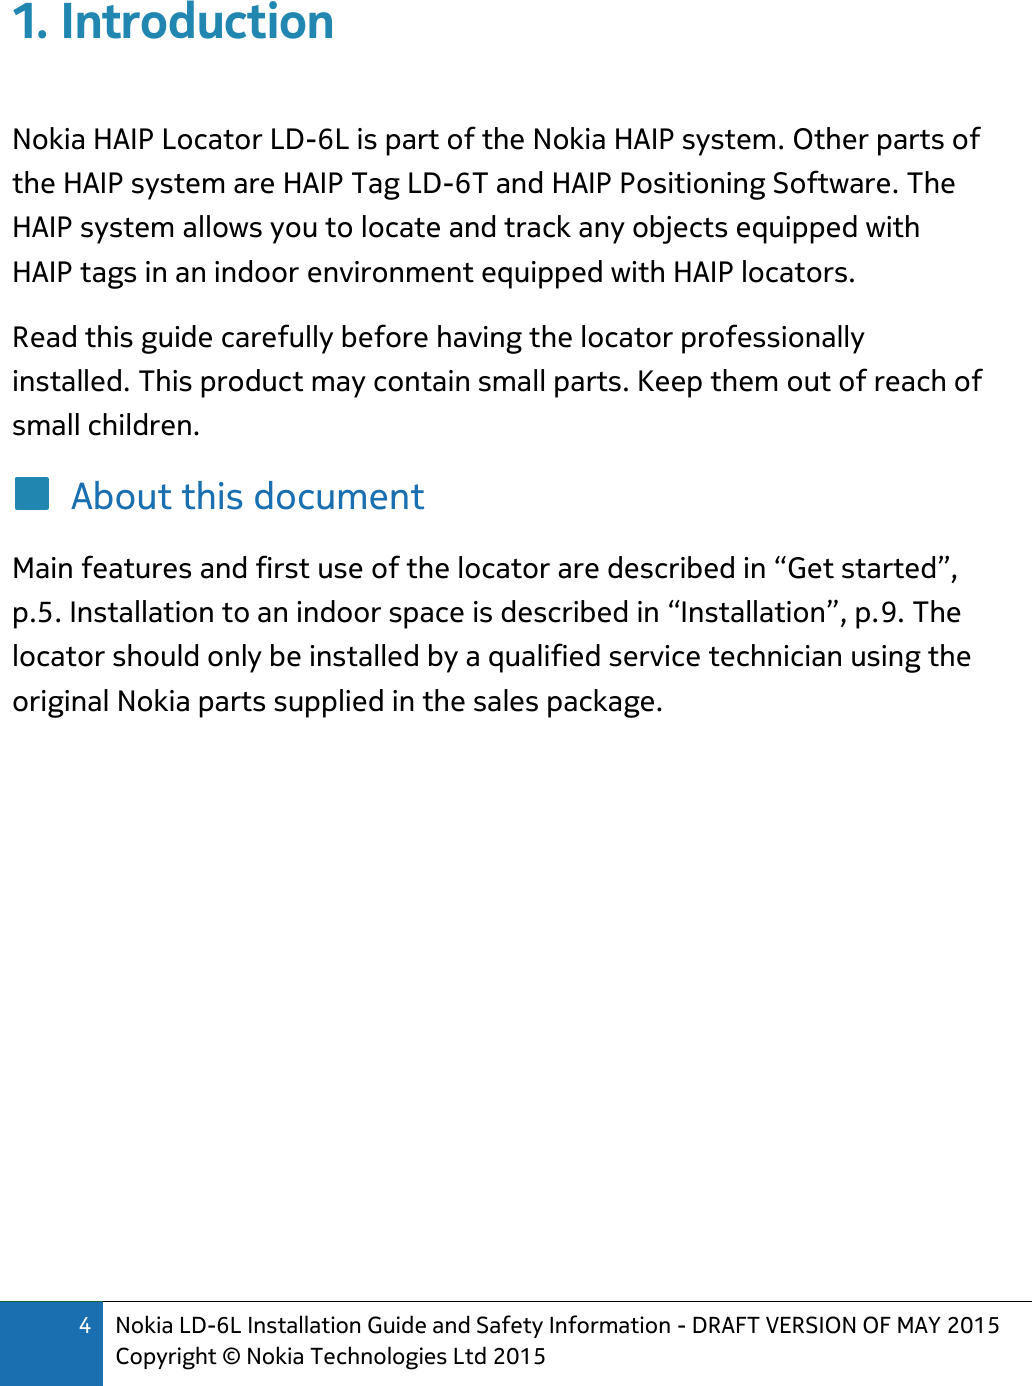 4 Nokia LD-6L Installation Guide and Safety Information - DRAFT VERSION OF MAY 2015 Copyright © Nokia Technologies Ltd 2015  1. Introduction  Nokia HAIP Locator LD-6L is part of the Nokia HAIP system. Other parts of the HAIP system are HAIP Tag LD-6T and HAIP Positioning Software. The HAIP system allows you to locate and track any objects equipped with HAIP tags in an indoor environment equipped with HAIP locators. Read this guide carefully before having the locator professionally installed. This product may contain small parts. Keep them out of reach of small children. About this document Main features and first use of the locator are described in “Get started”, p.5. Installation to an indoor space is described in “Installation”, p.9. The locator should only be installed by a qualified service technician using the original Nokia parts supplied in the sales package.         